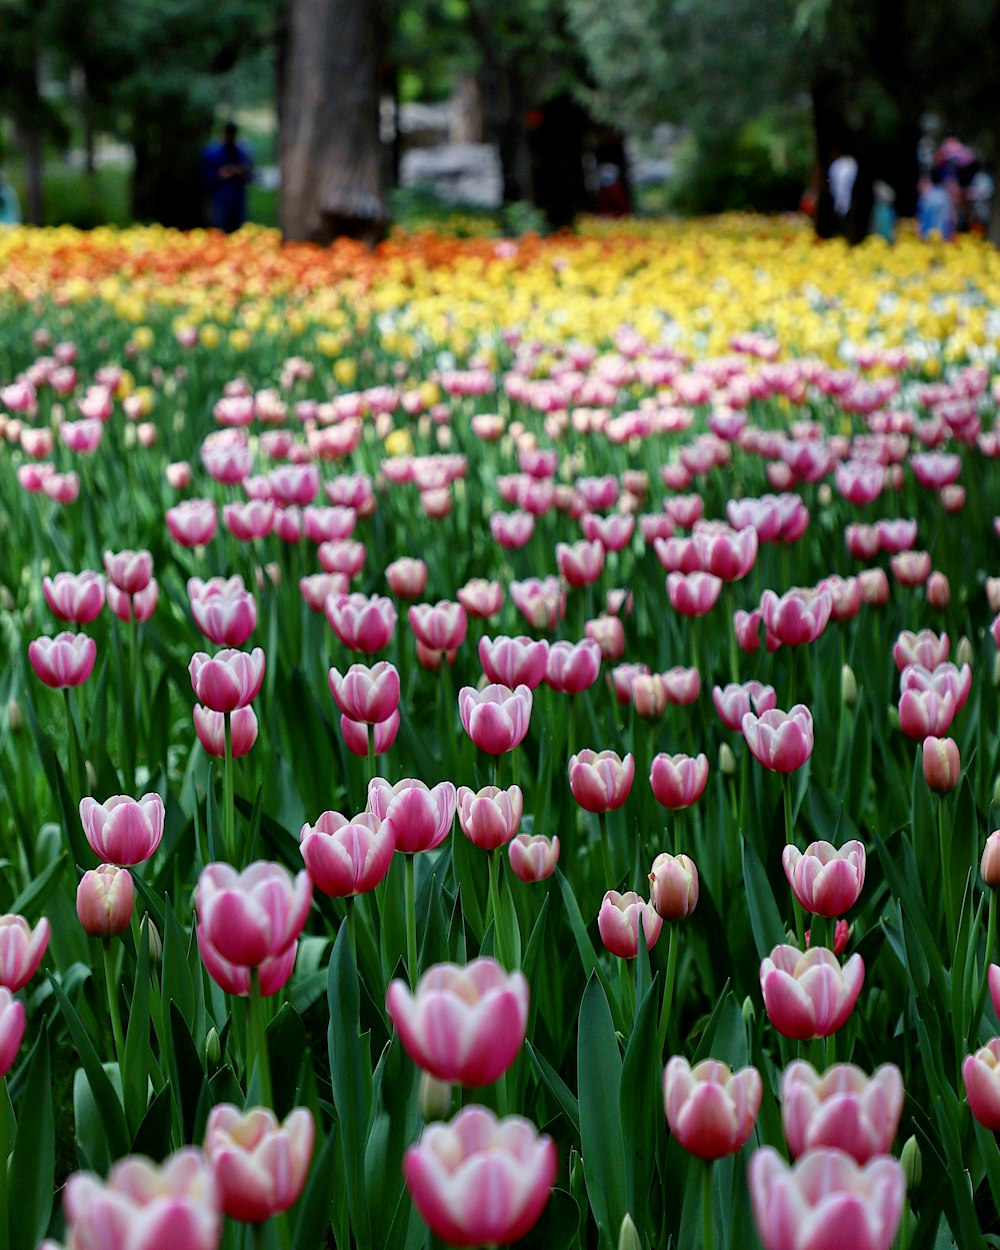 pink and white tulips field during daytime